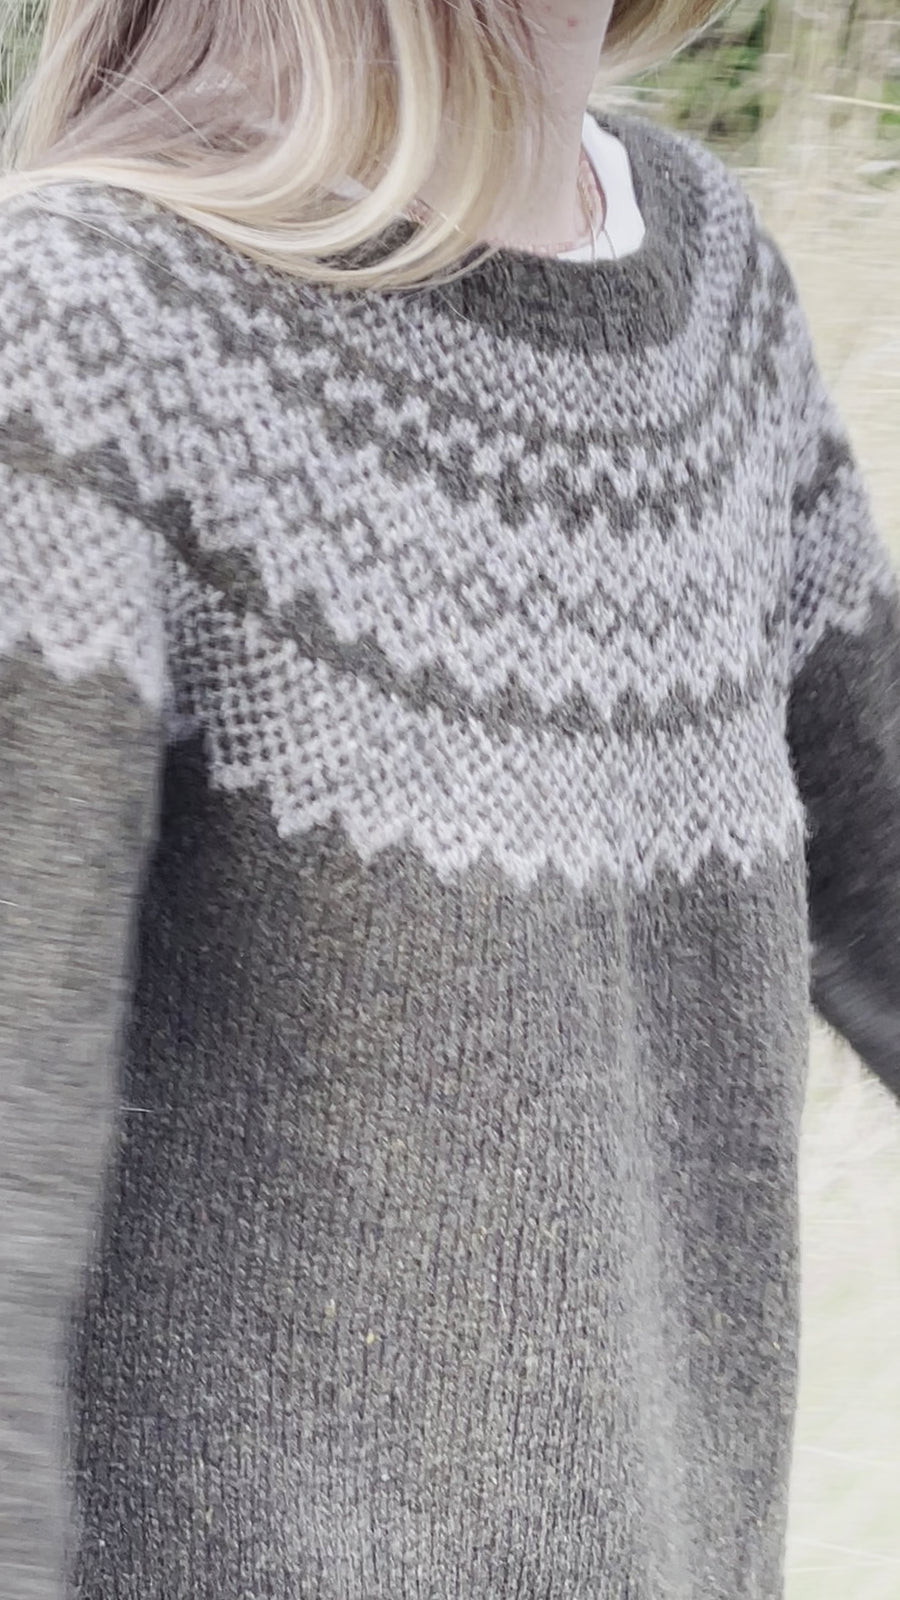 Biches & Bûches The Afterparty Sweater - pdf pattern in Italian